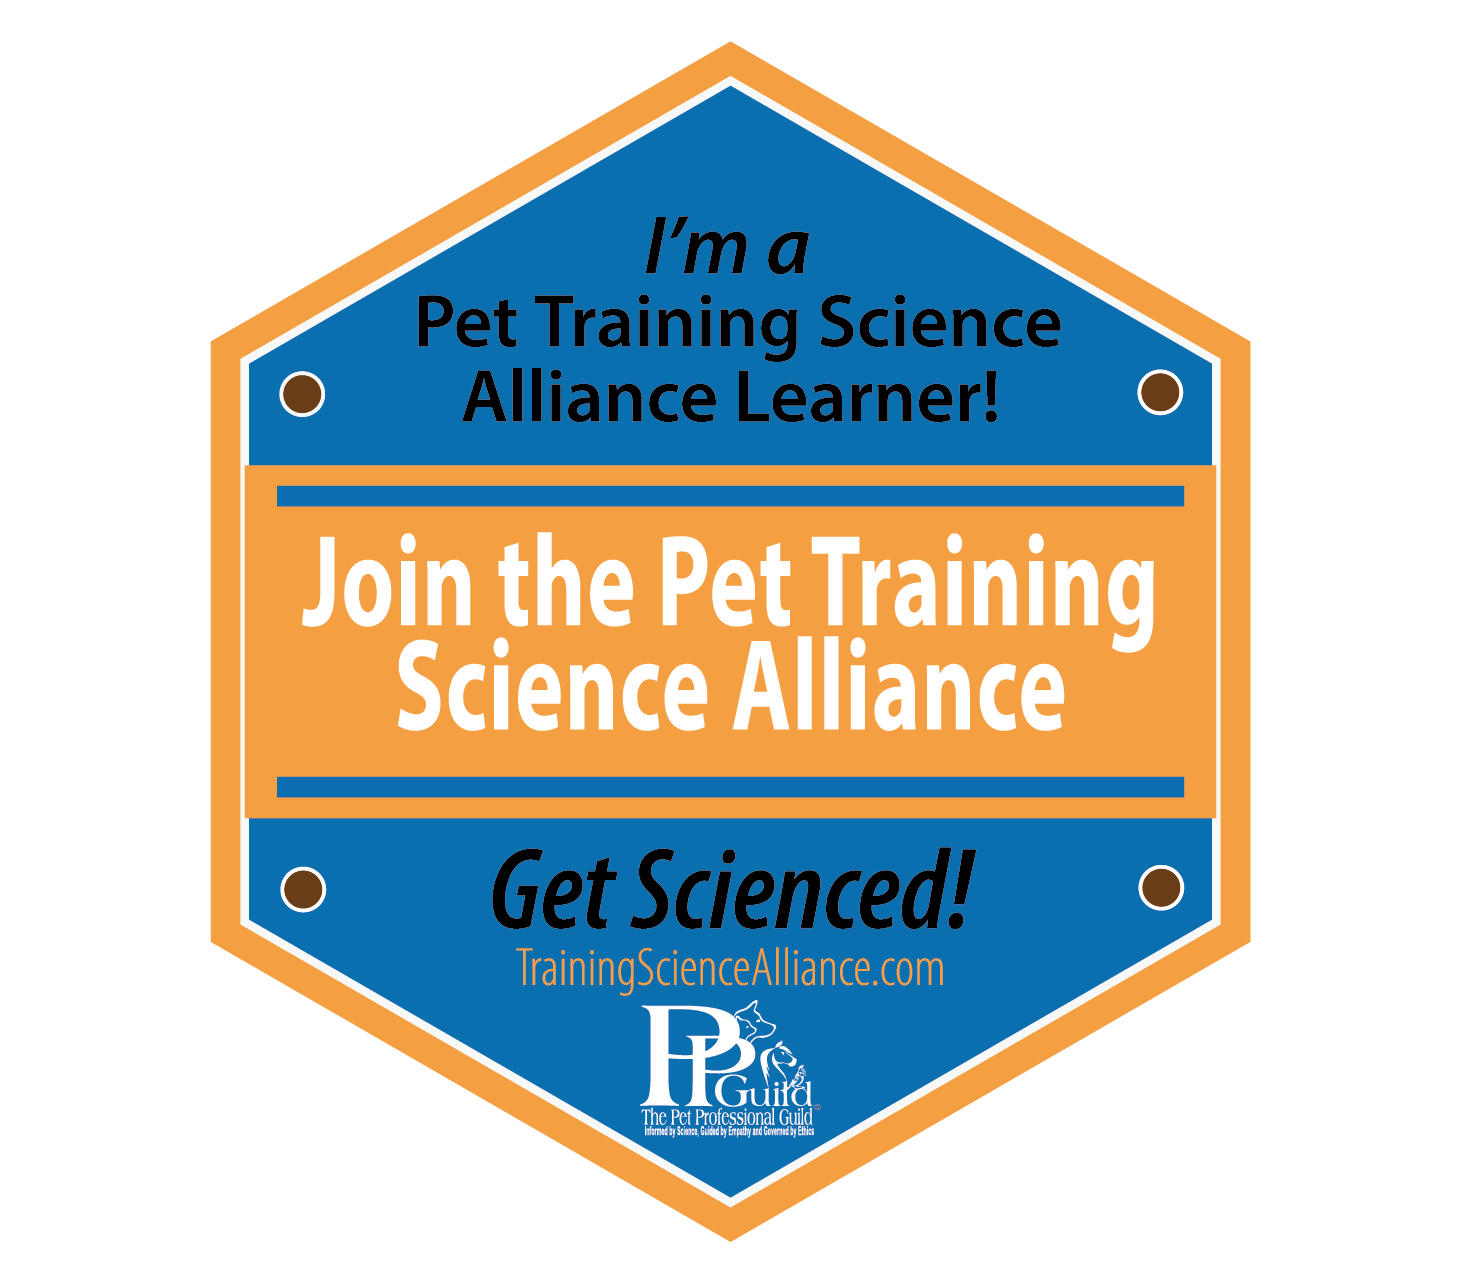 PTSA Research Findings. Shaping Canine Training: Insights from Professional Dog Trainers with Jamie DeLeeuw from Community Research